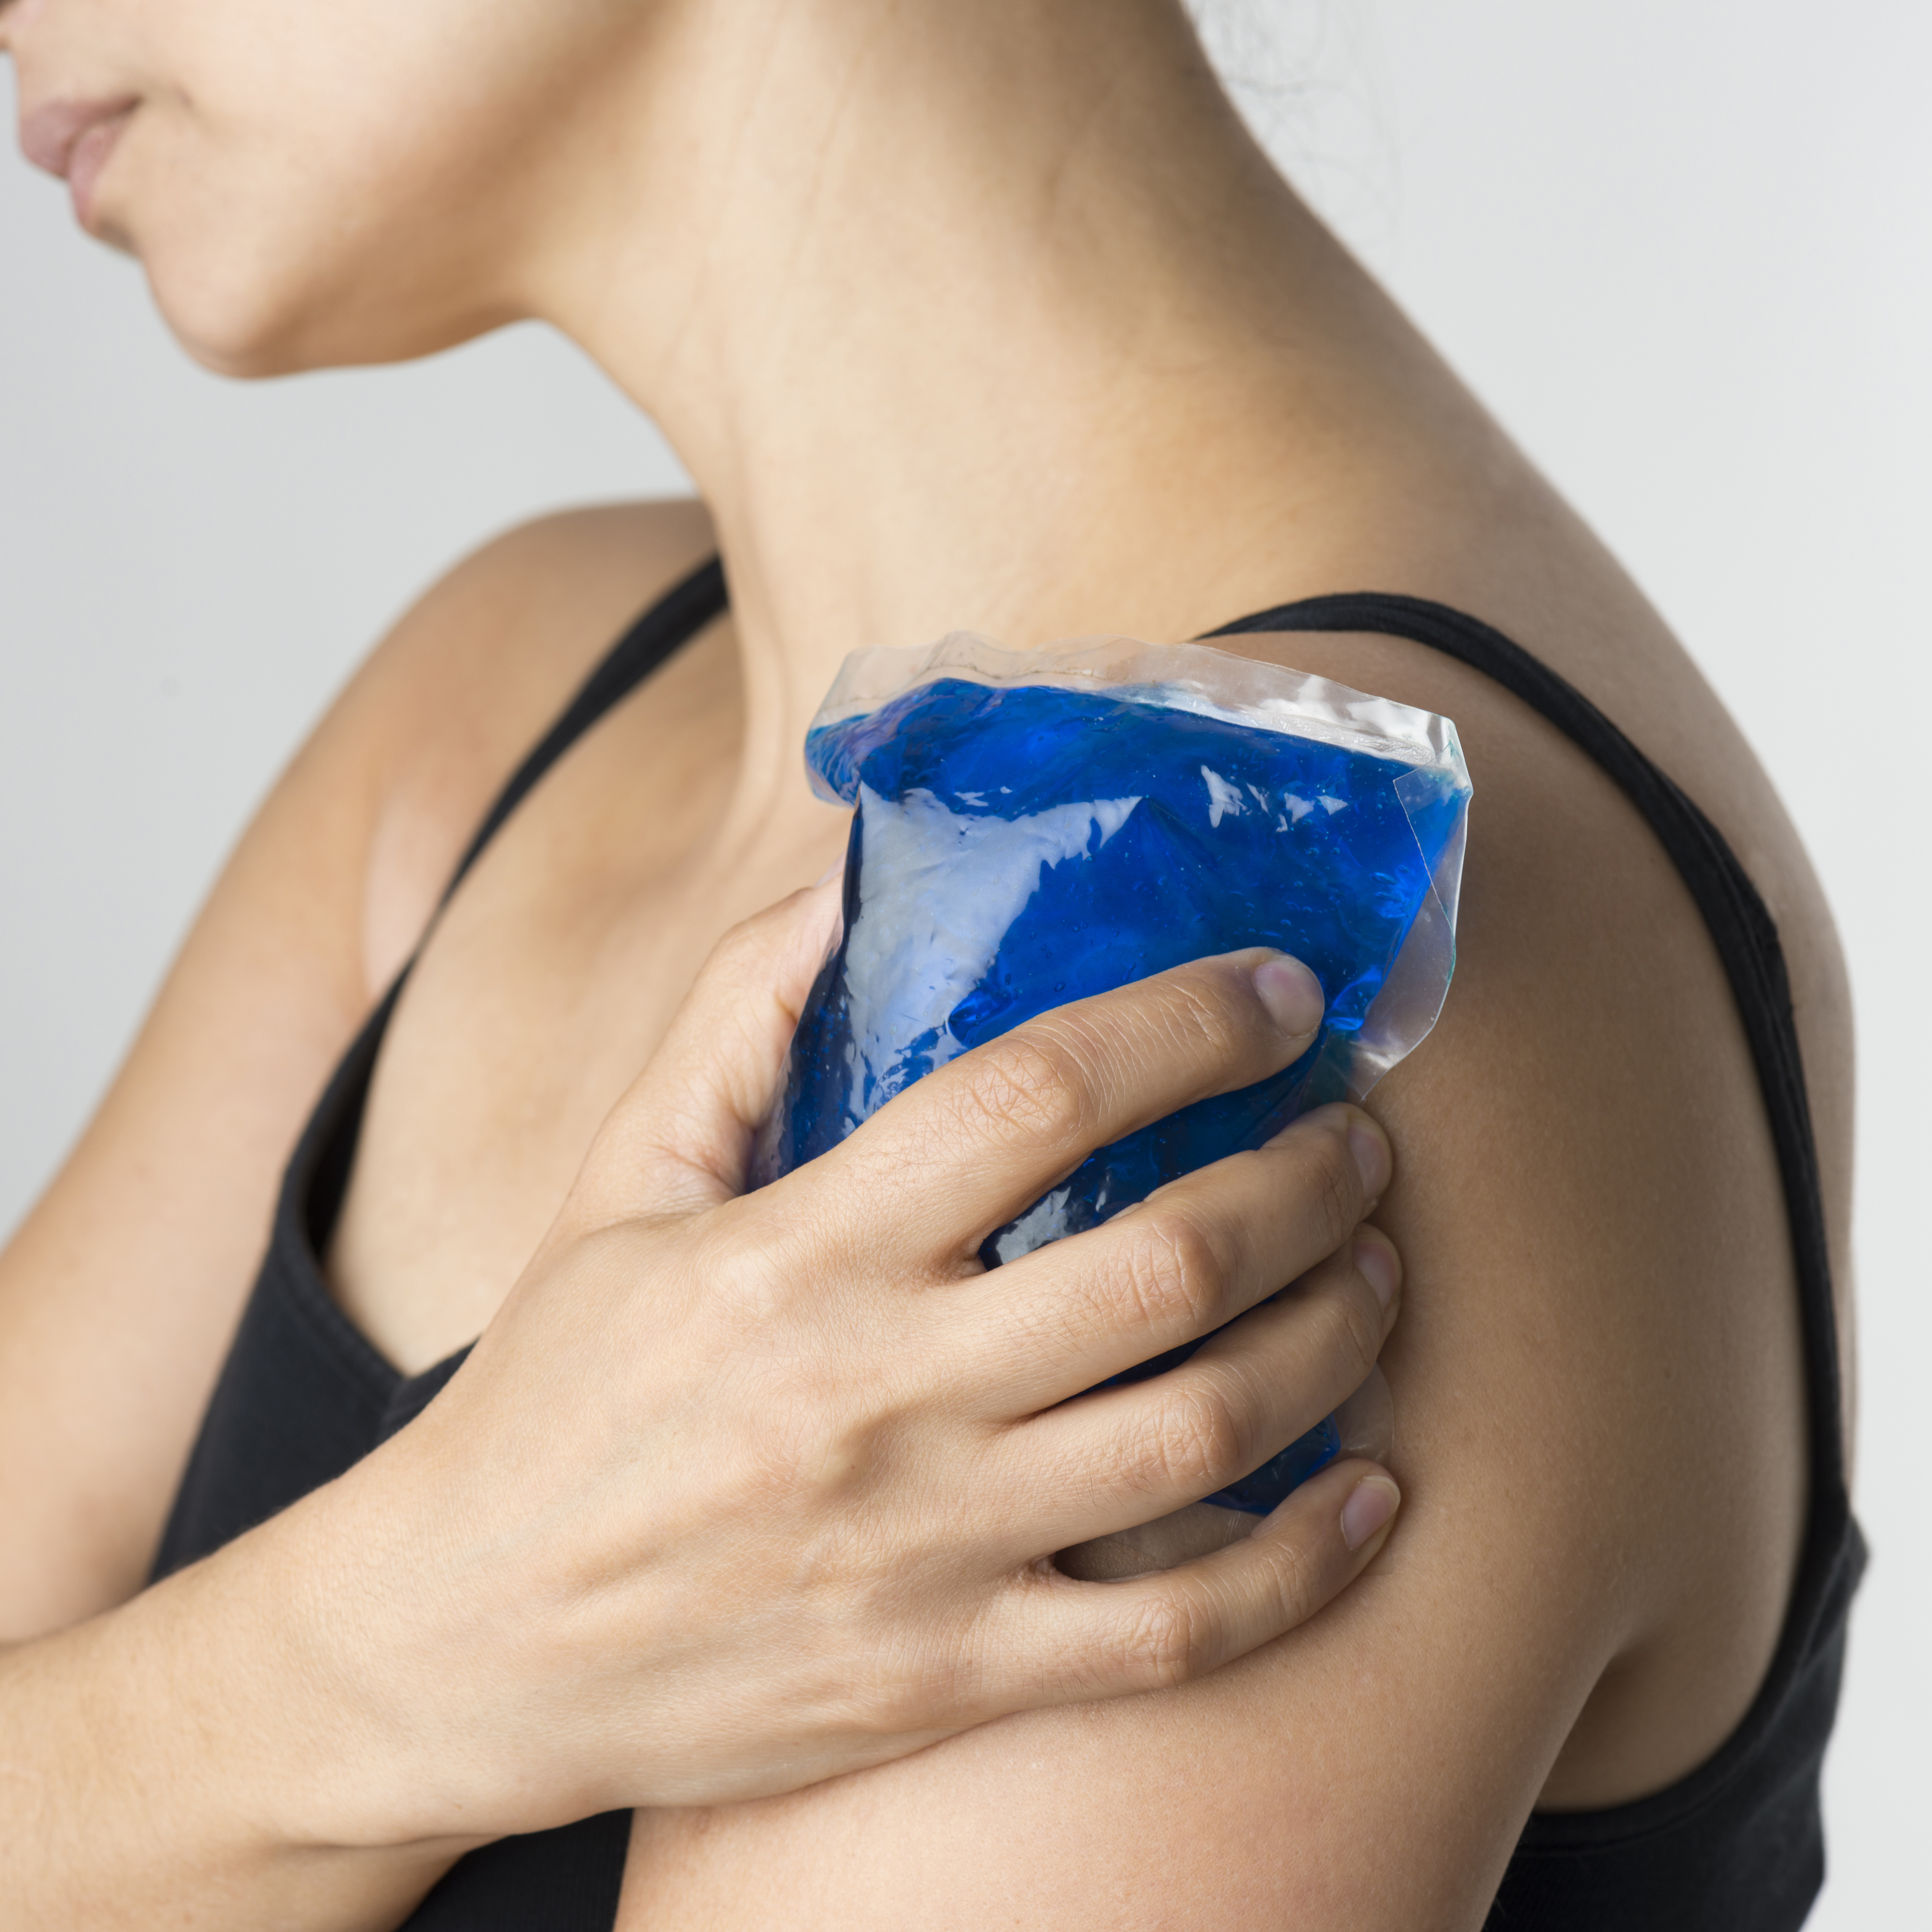 Woman cooling her shoulder/upper arm with a cold compress